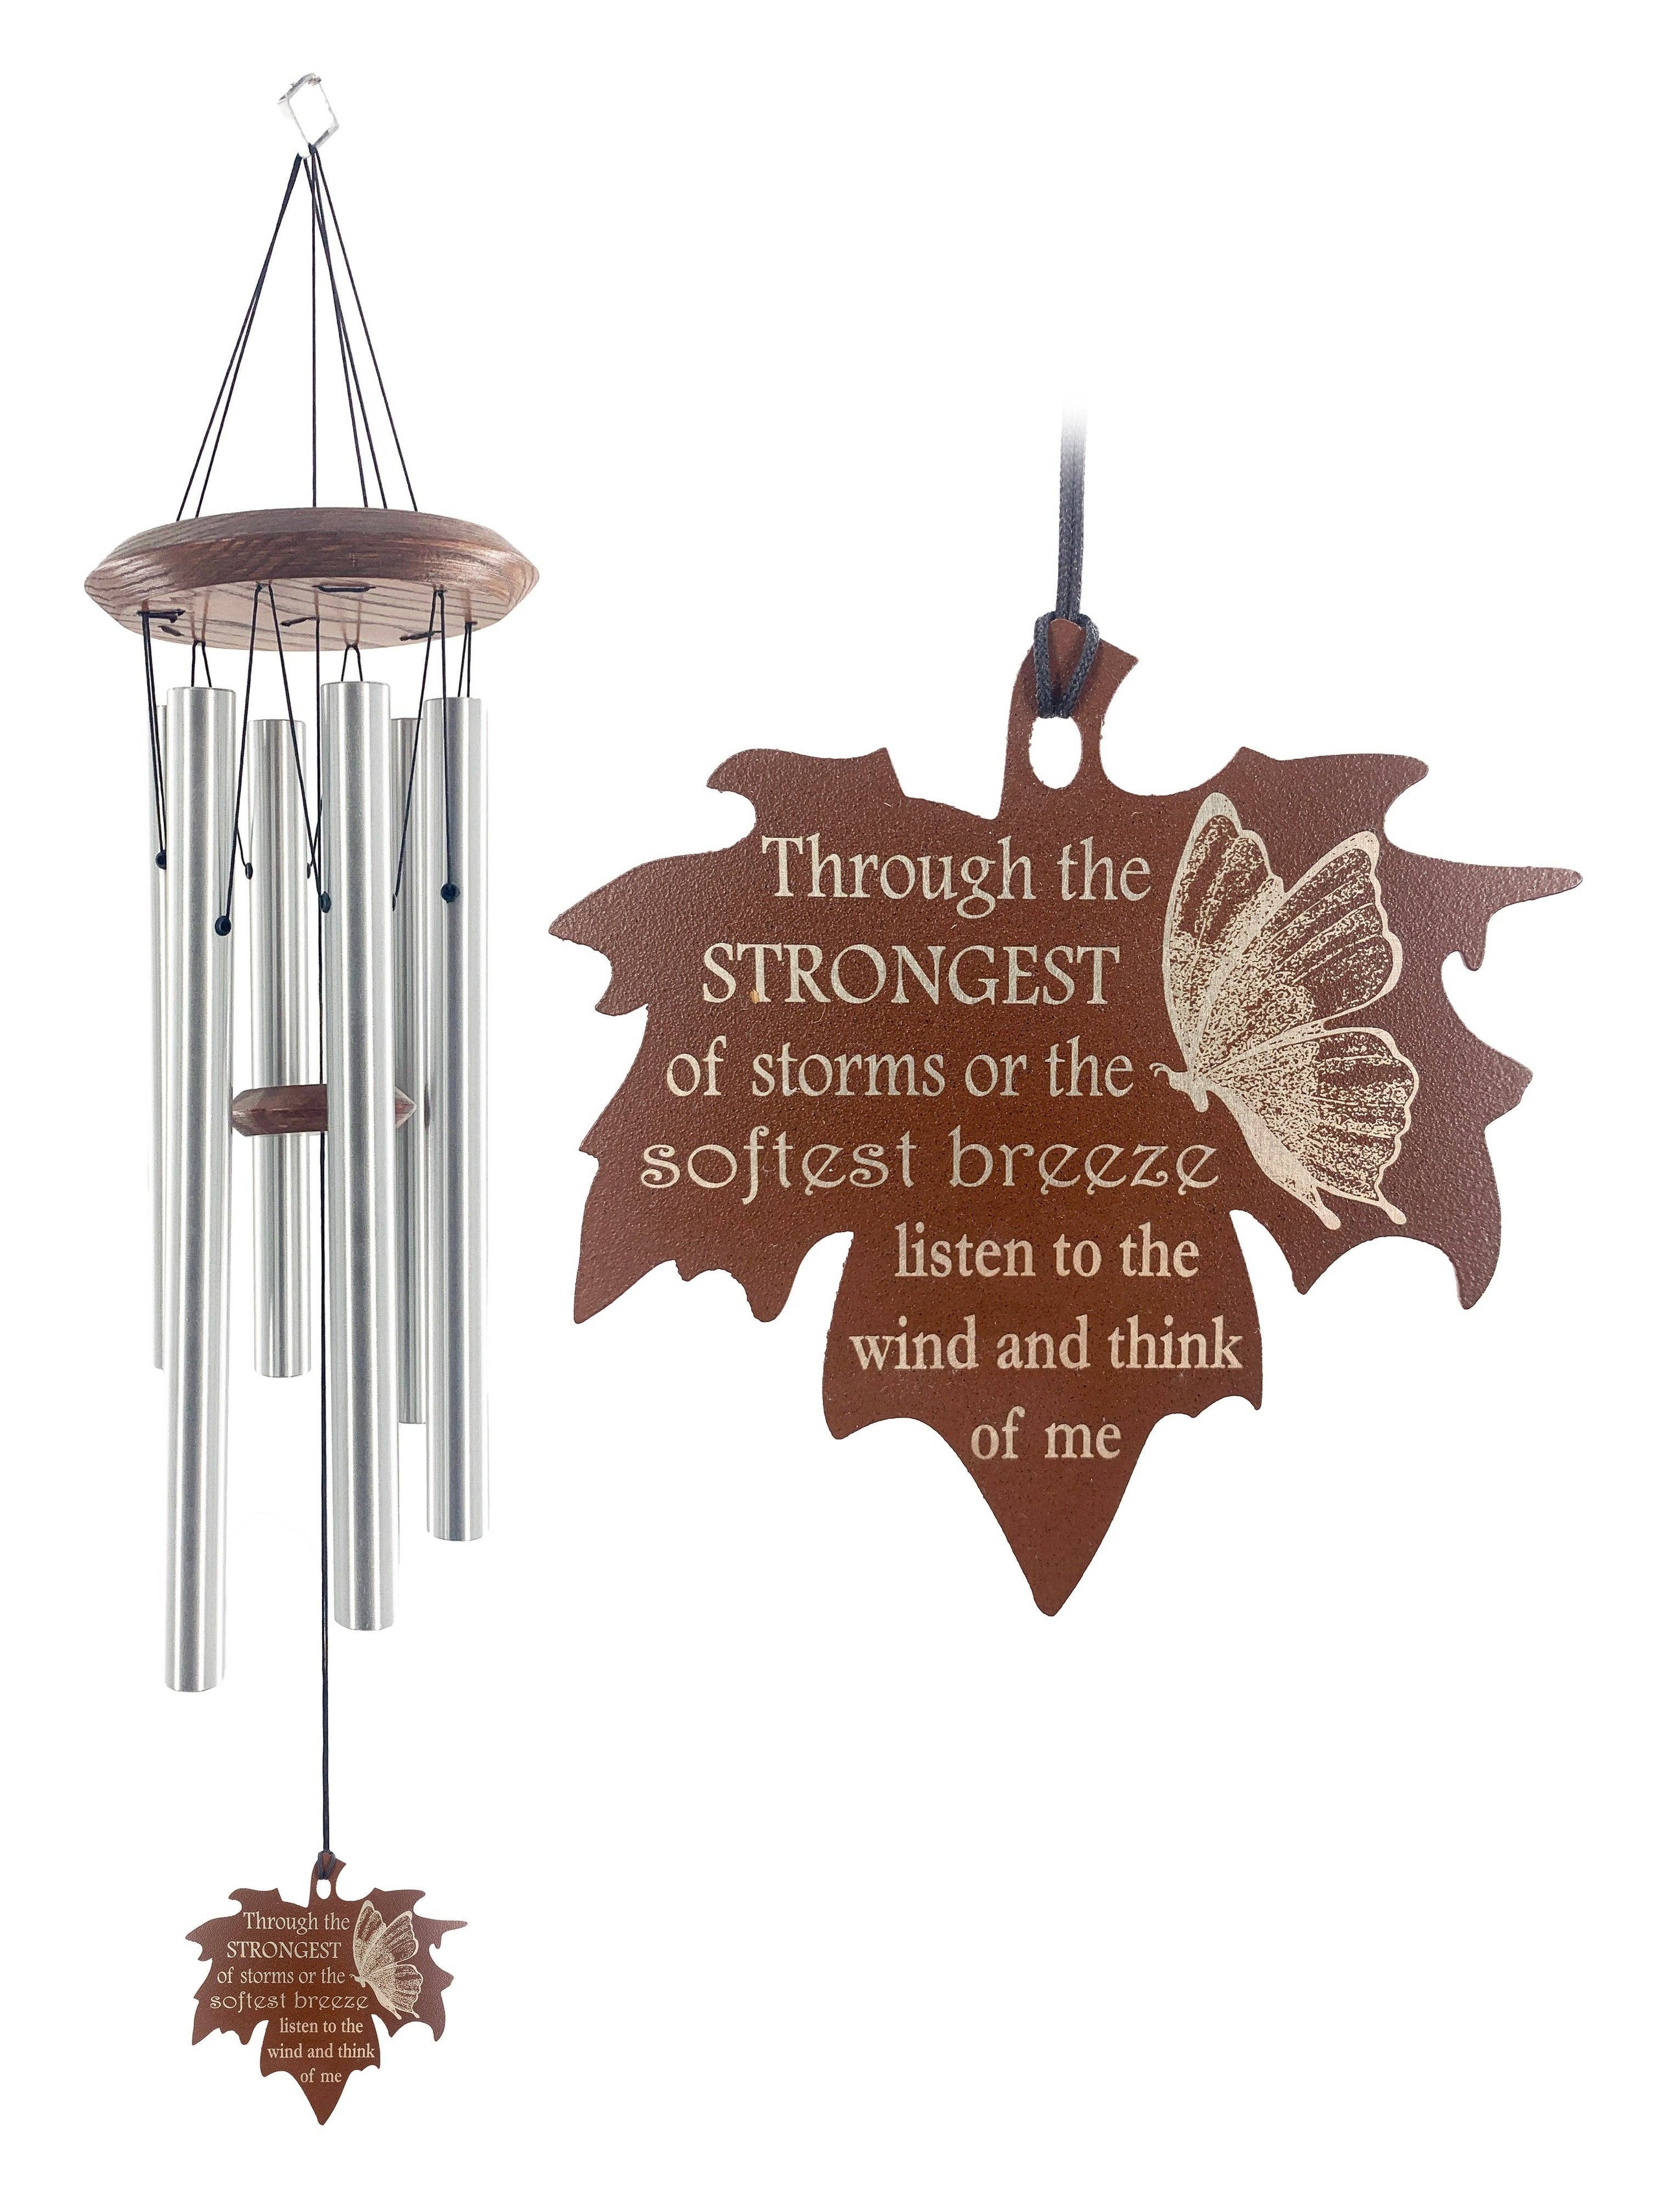 Hand tuned metal memorial wind chime with an engraved butterfly on